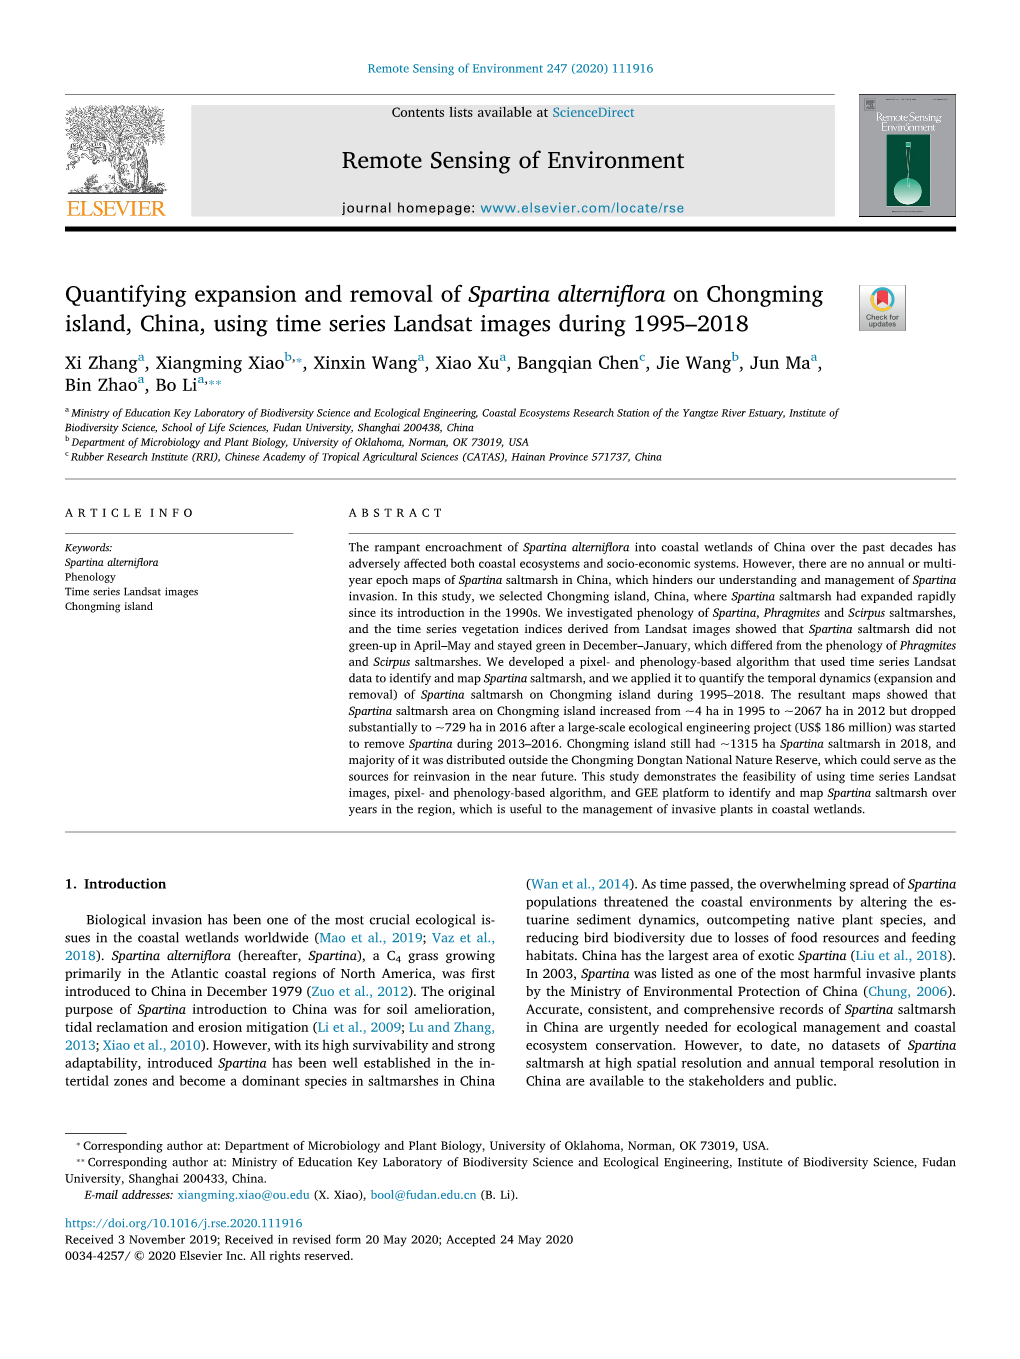 Quantifying Expansion and Removal of Spartina Alterniflora on Chongming